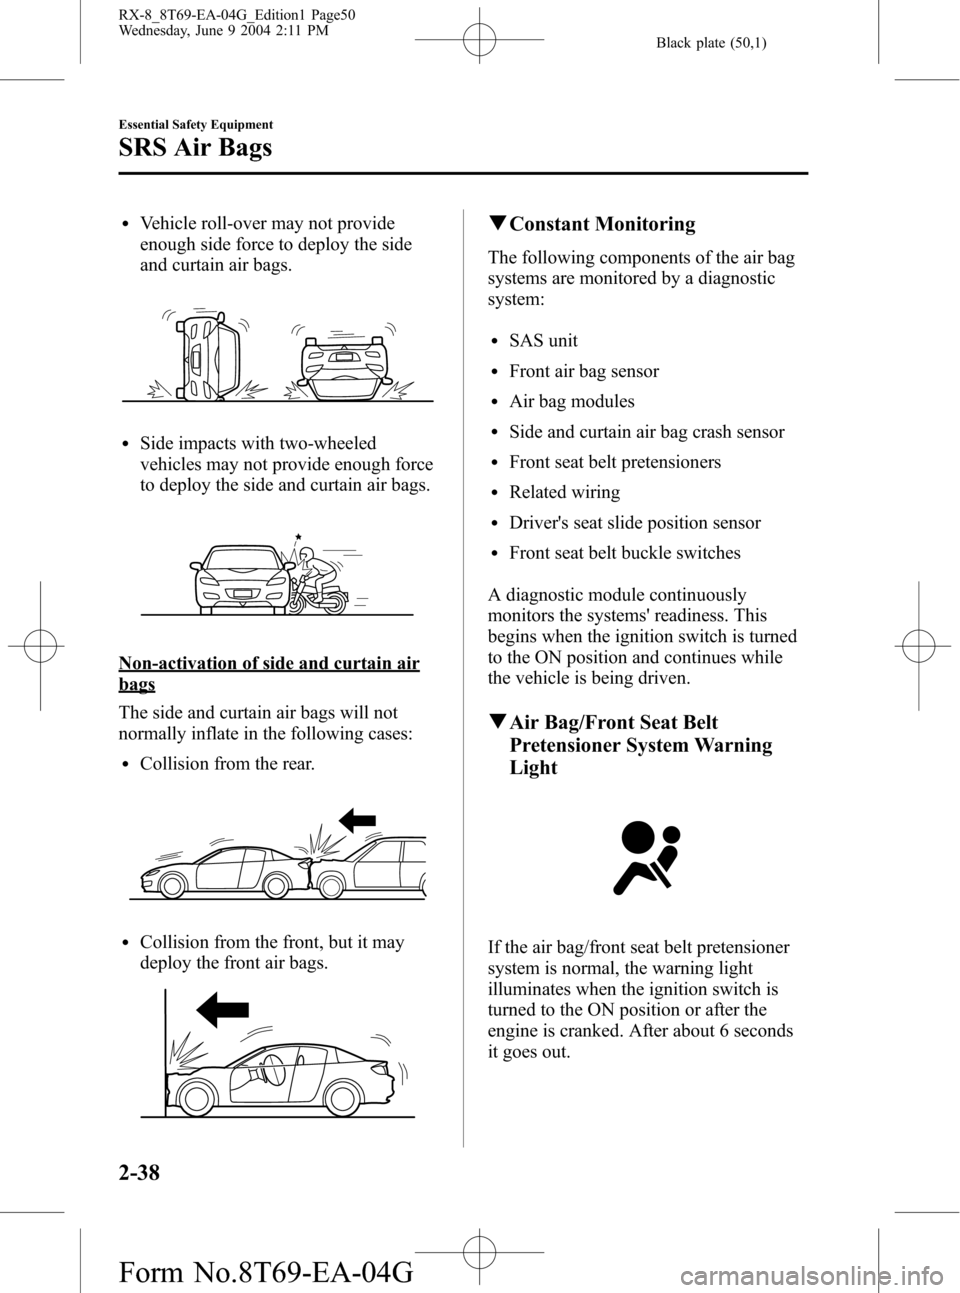 MAZDA MODEL RX 8 2005   (in English) Service Manual Black plate (50,1)
lVehicle roll-over may not provide
enough side force to deploy the side
and curtain air bags.
lSide impacts with two-wheeled
vehicles may not provide enough force
to deploy the side